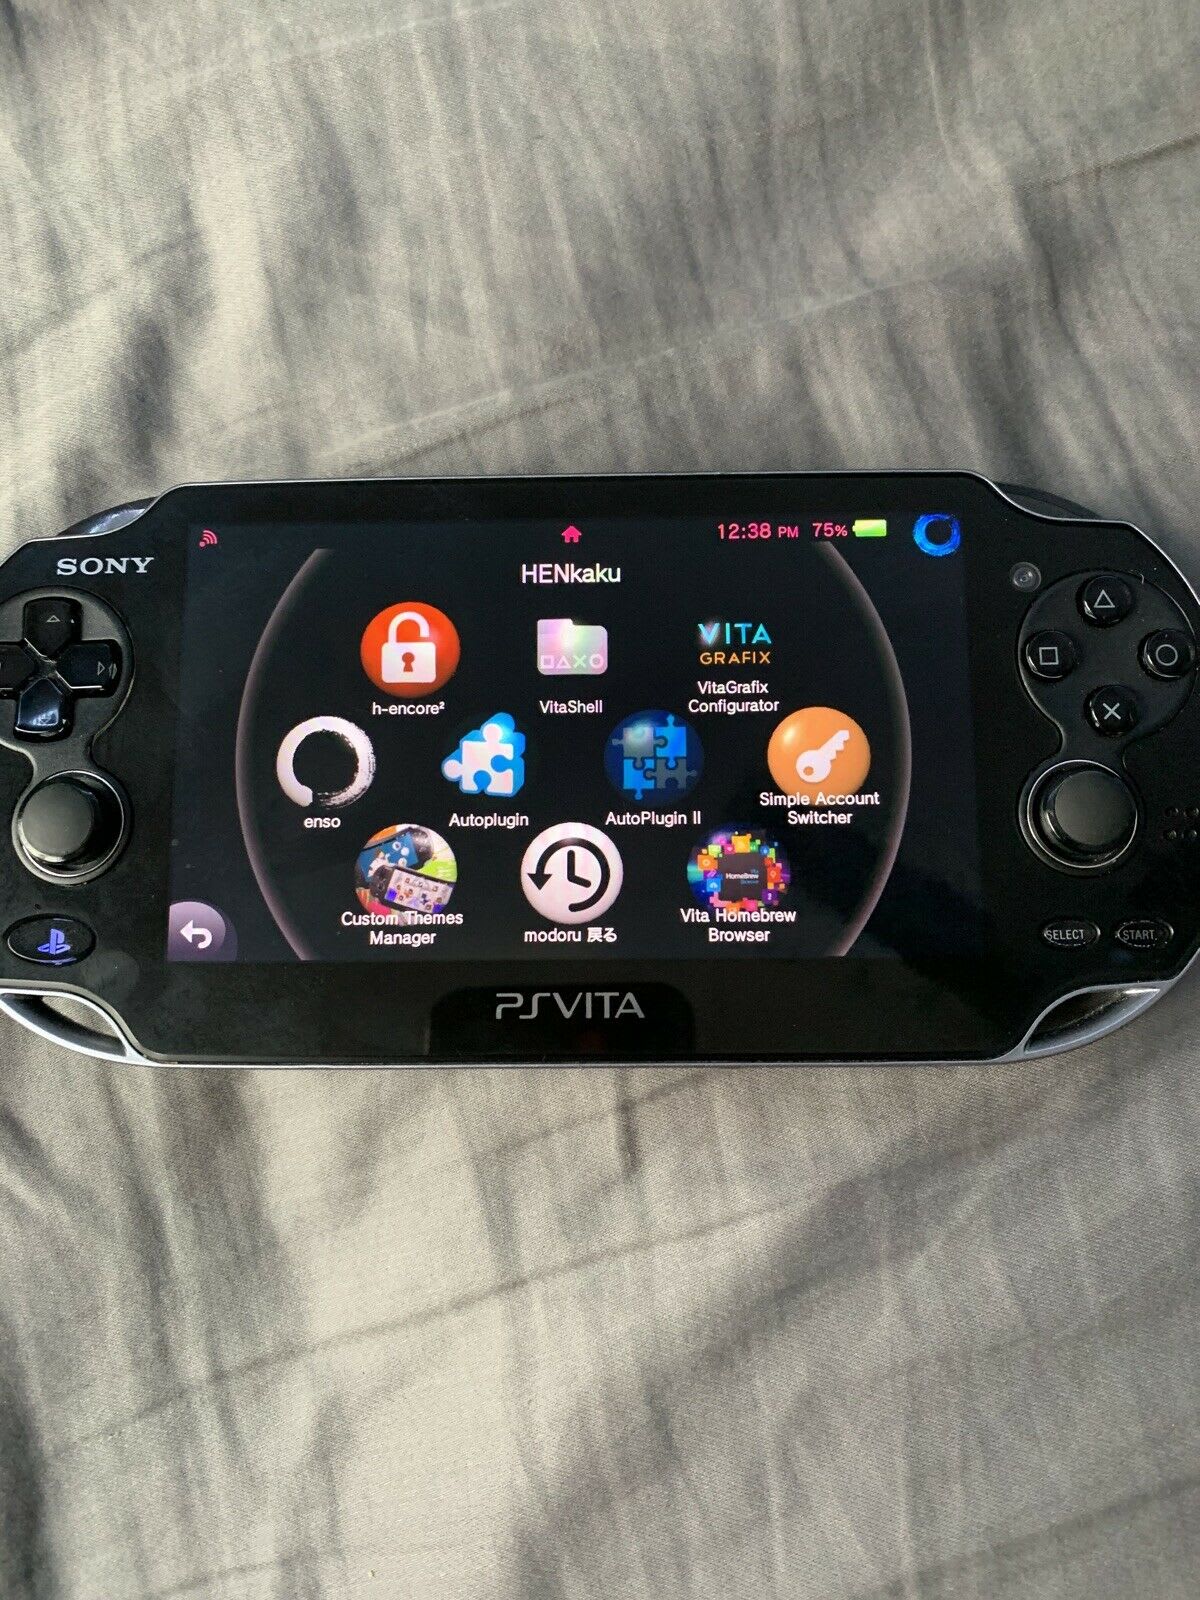 ps2 games on ps vita